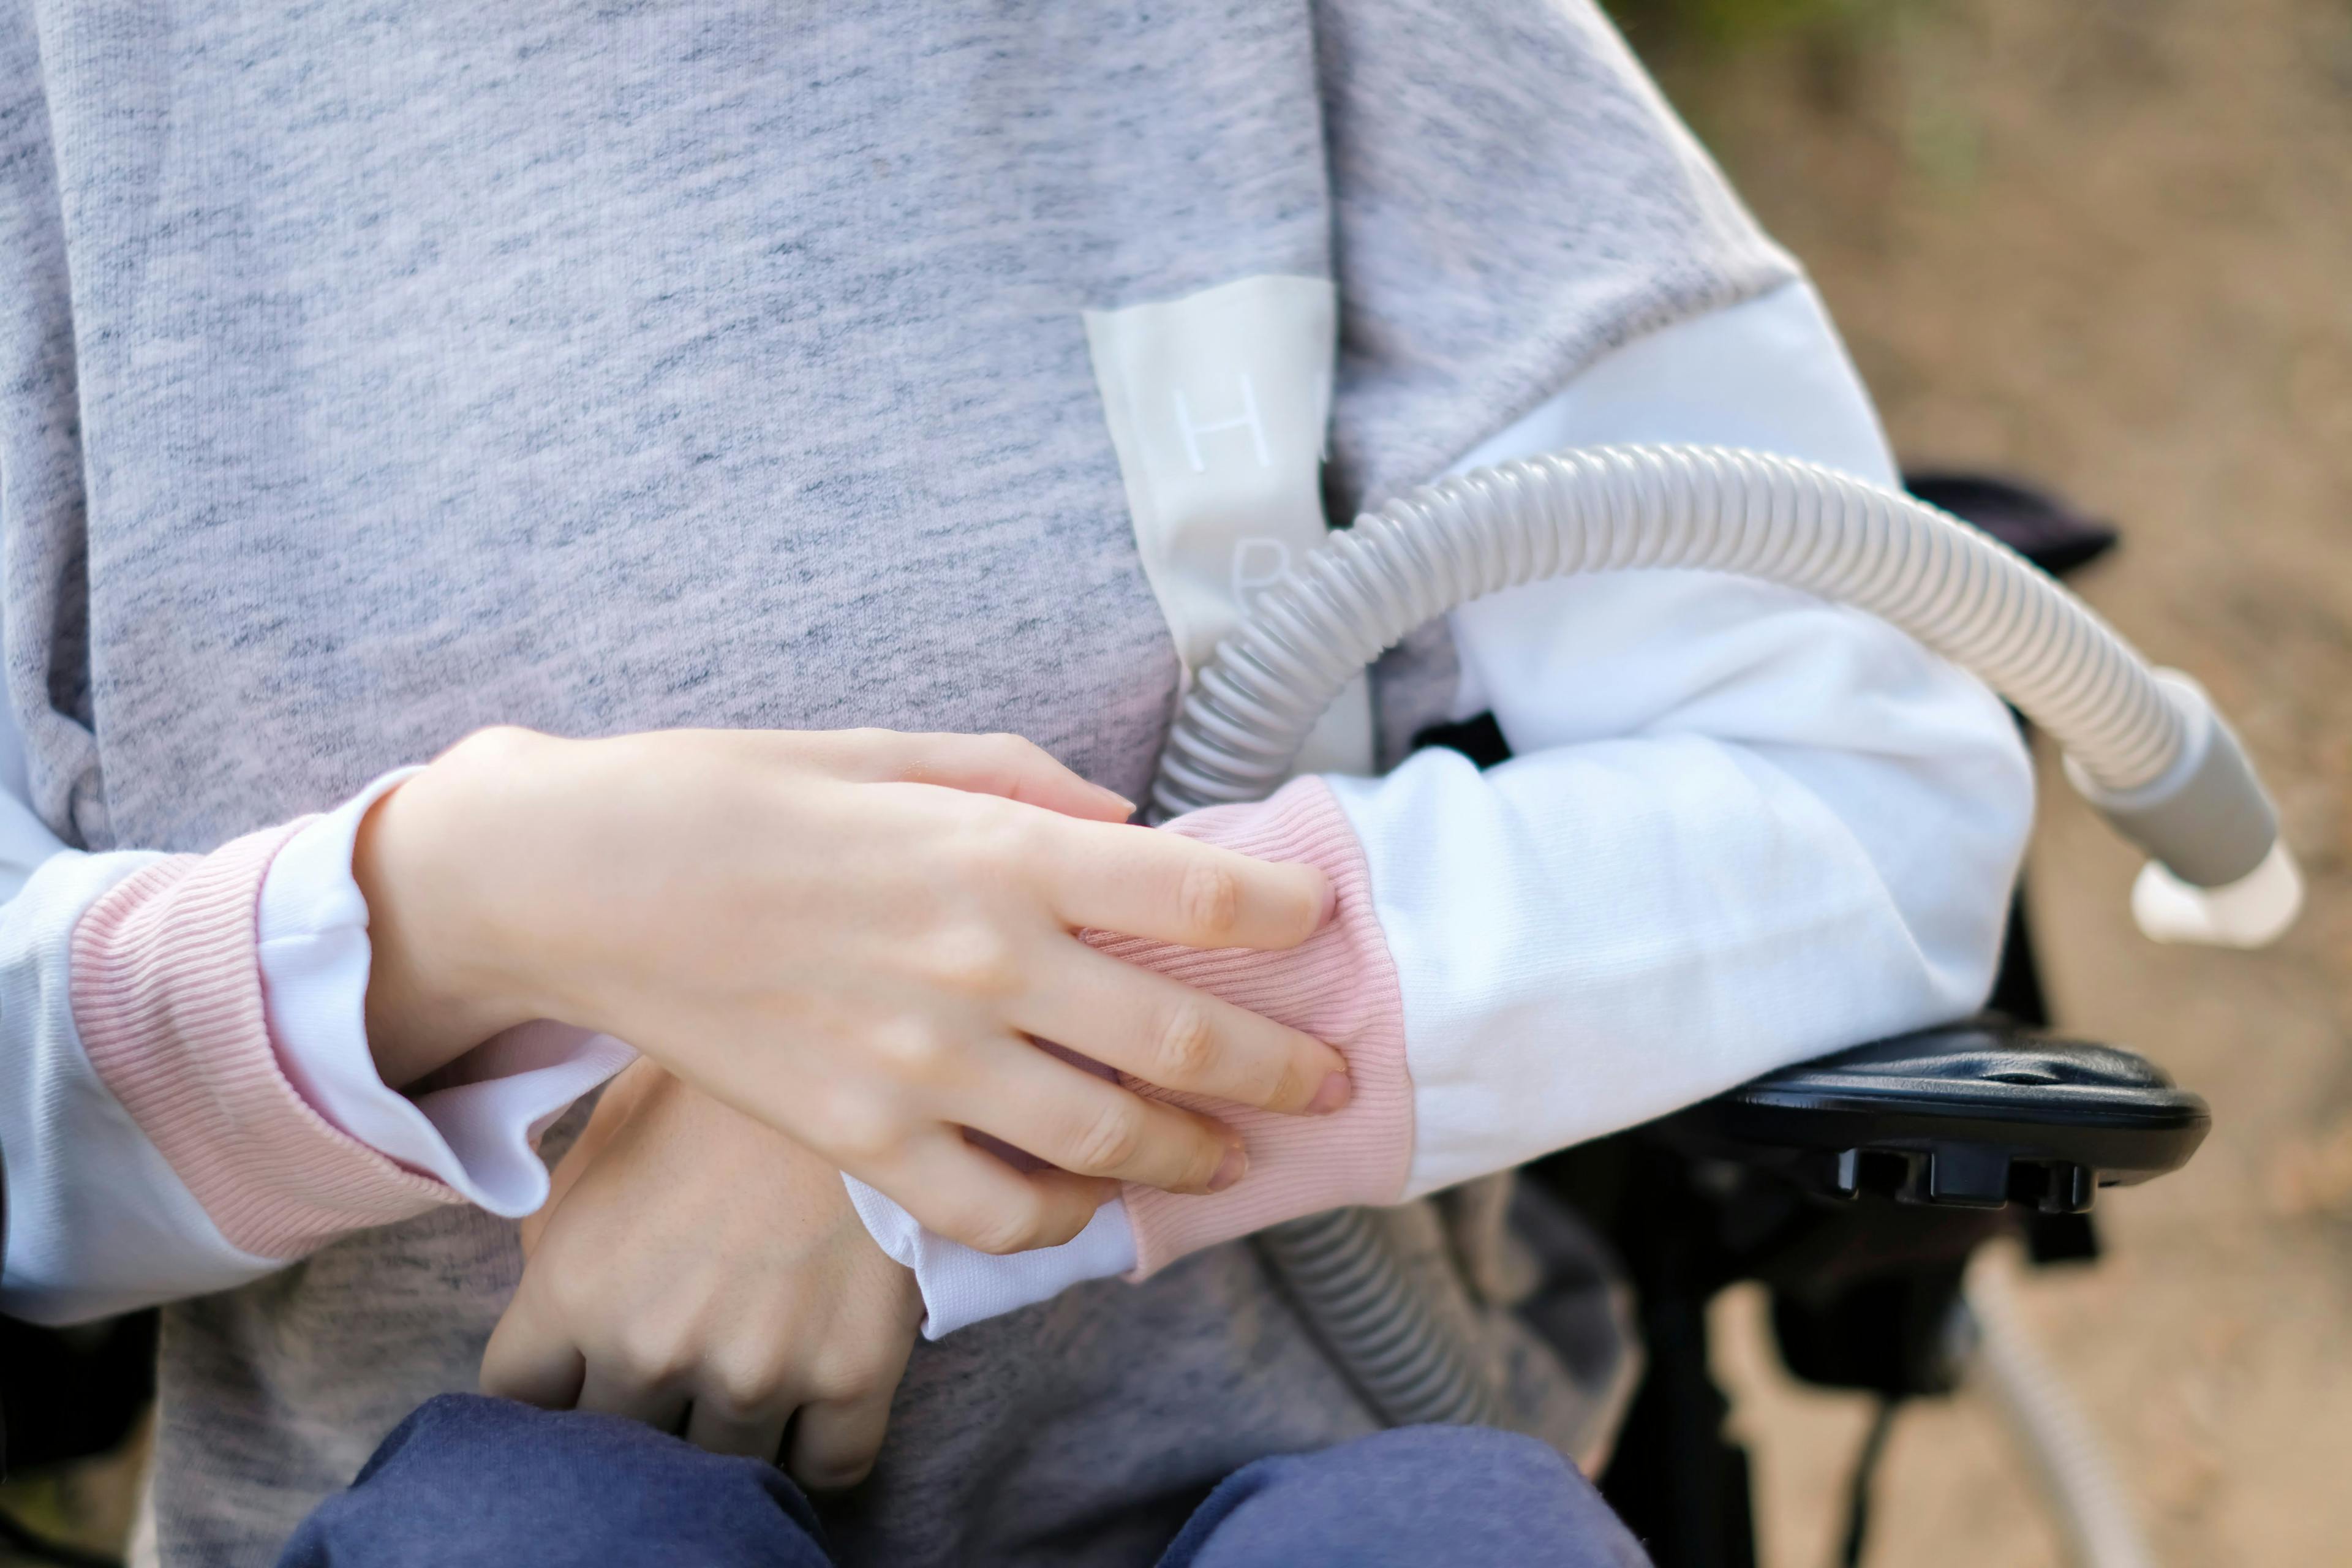 Hands of a disabled person with muscular dystrophy holding a ventilator | Image Credit: ins - stock.adobe.com